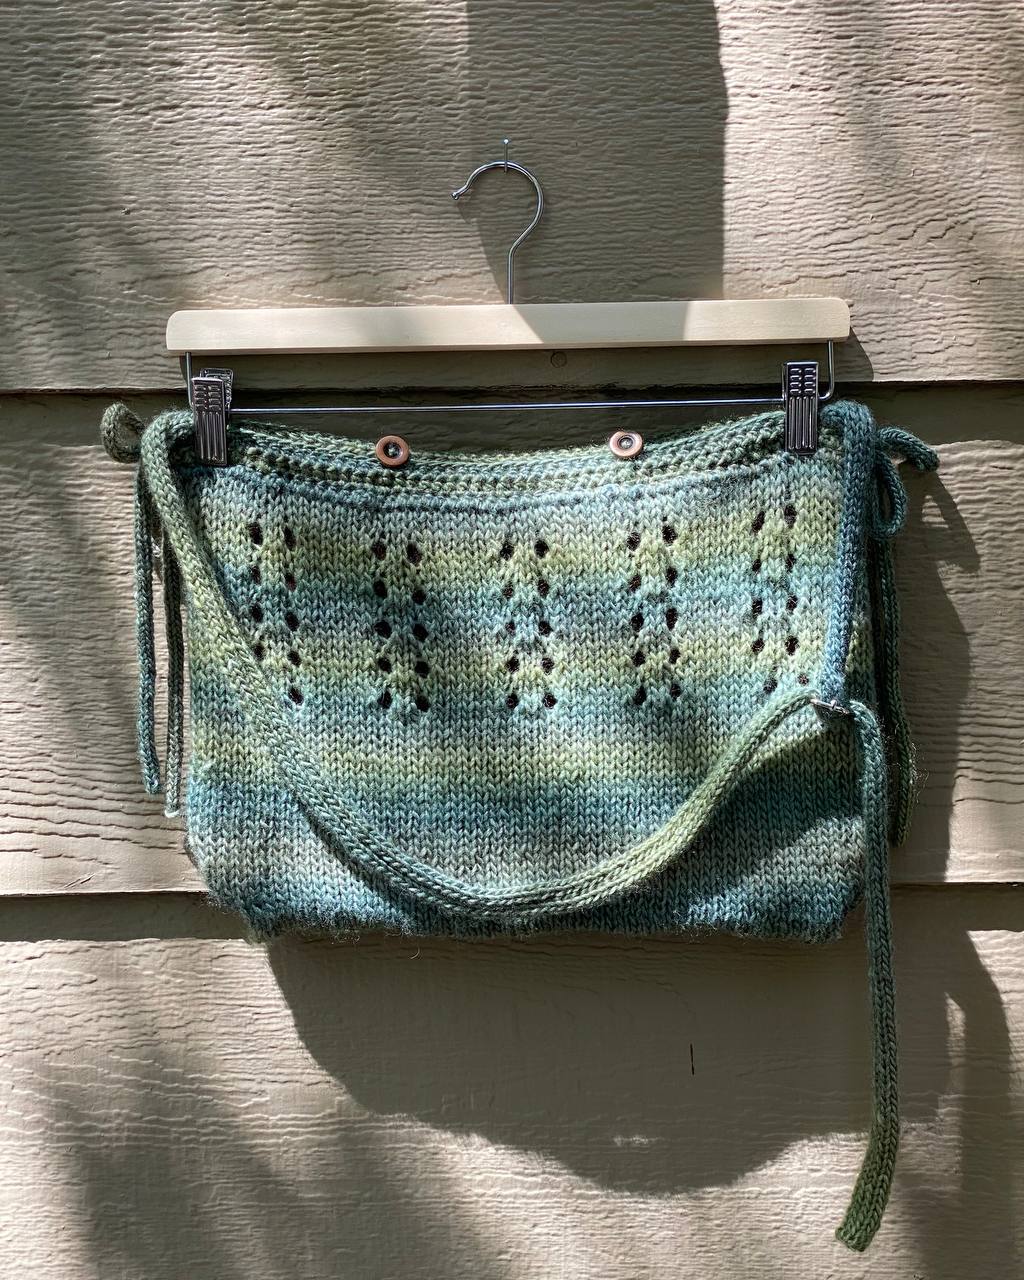 Bag No. 2 - Lace-y Forest